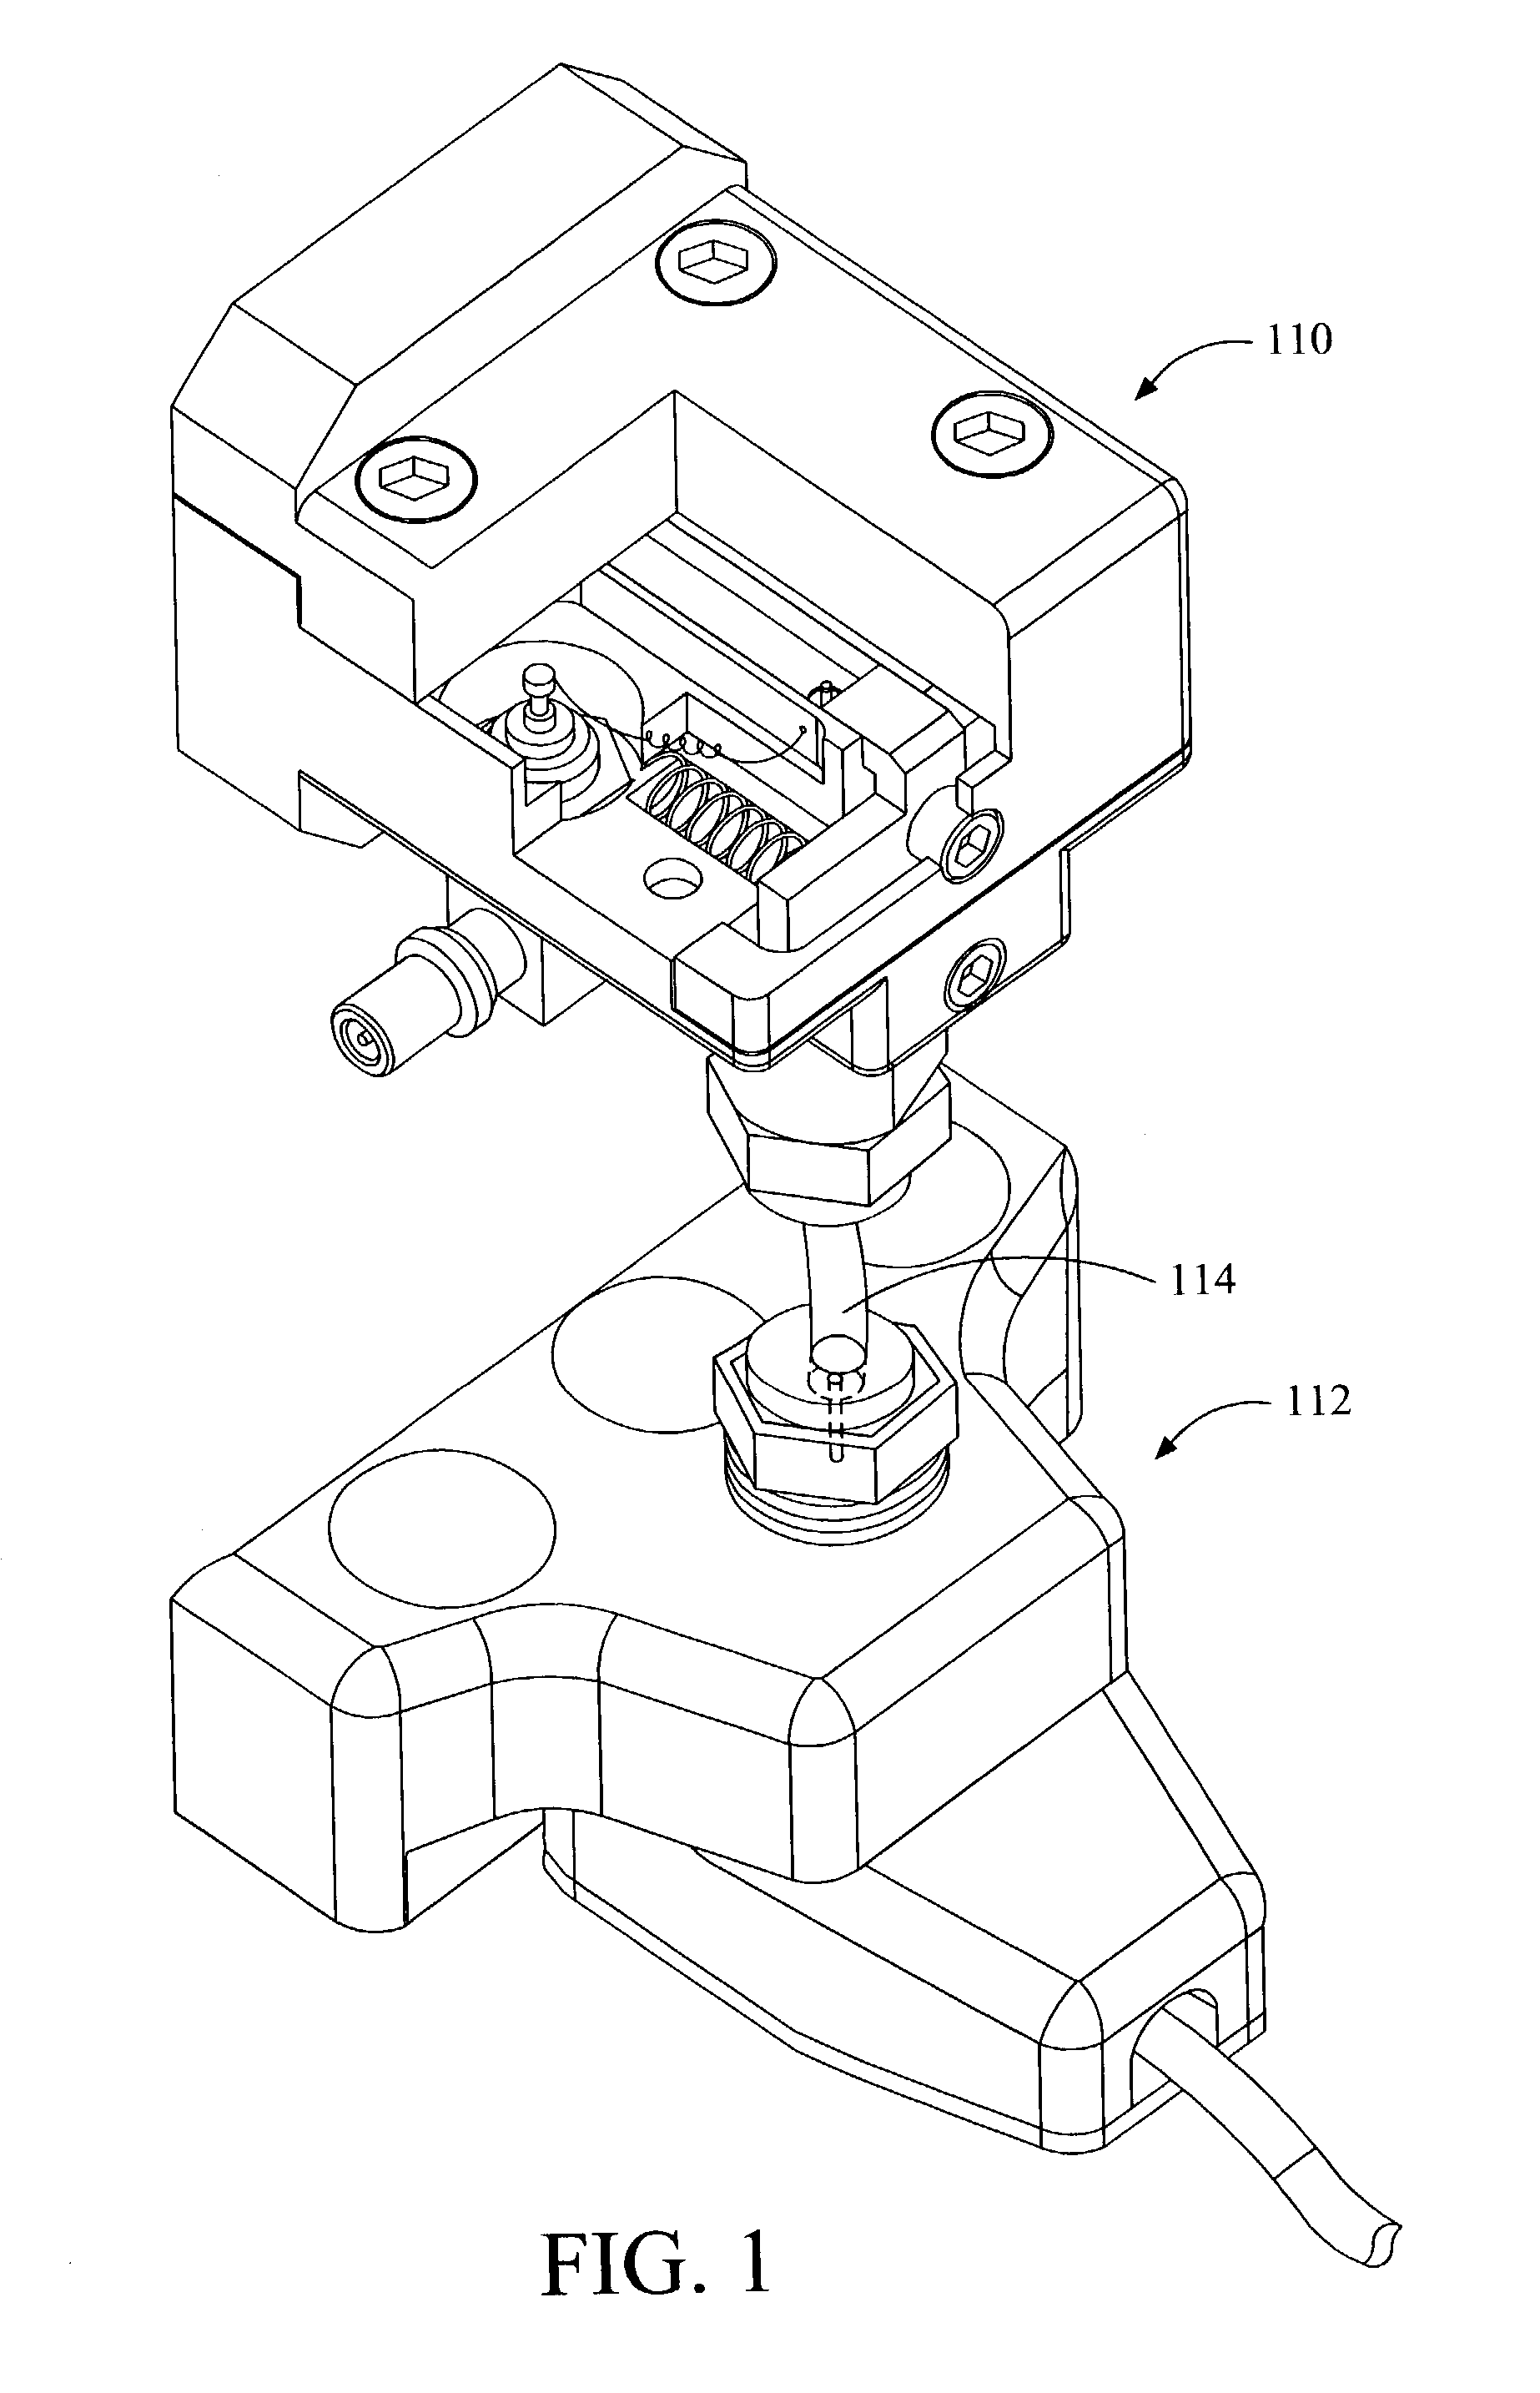 Waveguide adapter for probe assembly having a detachable bias tee